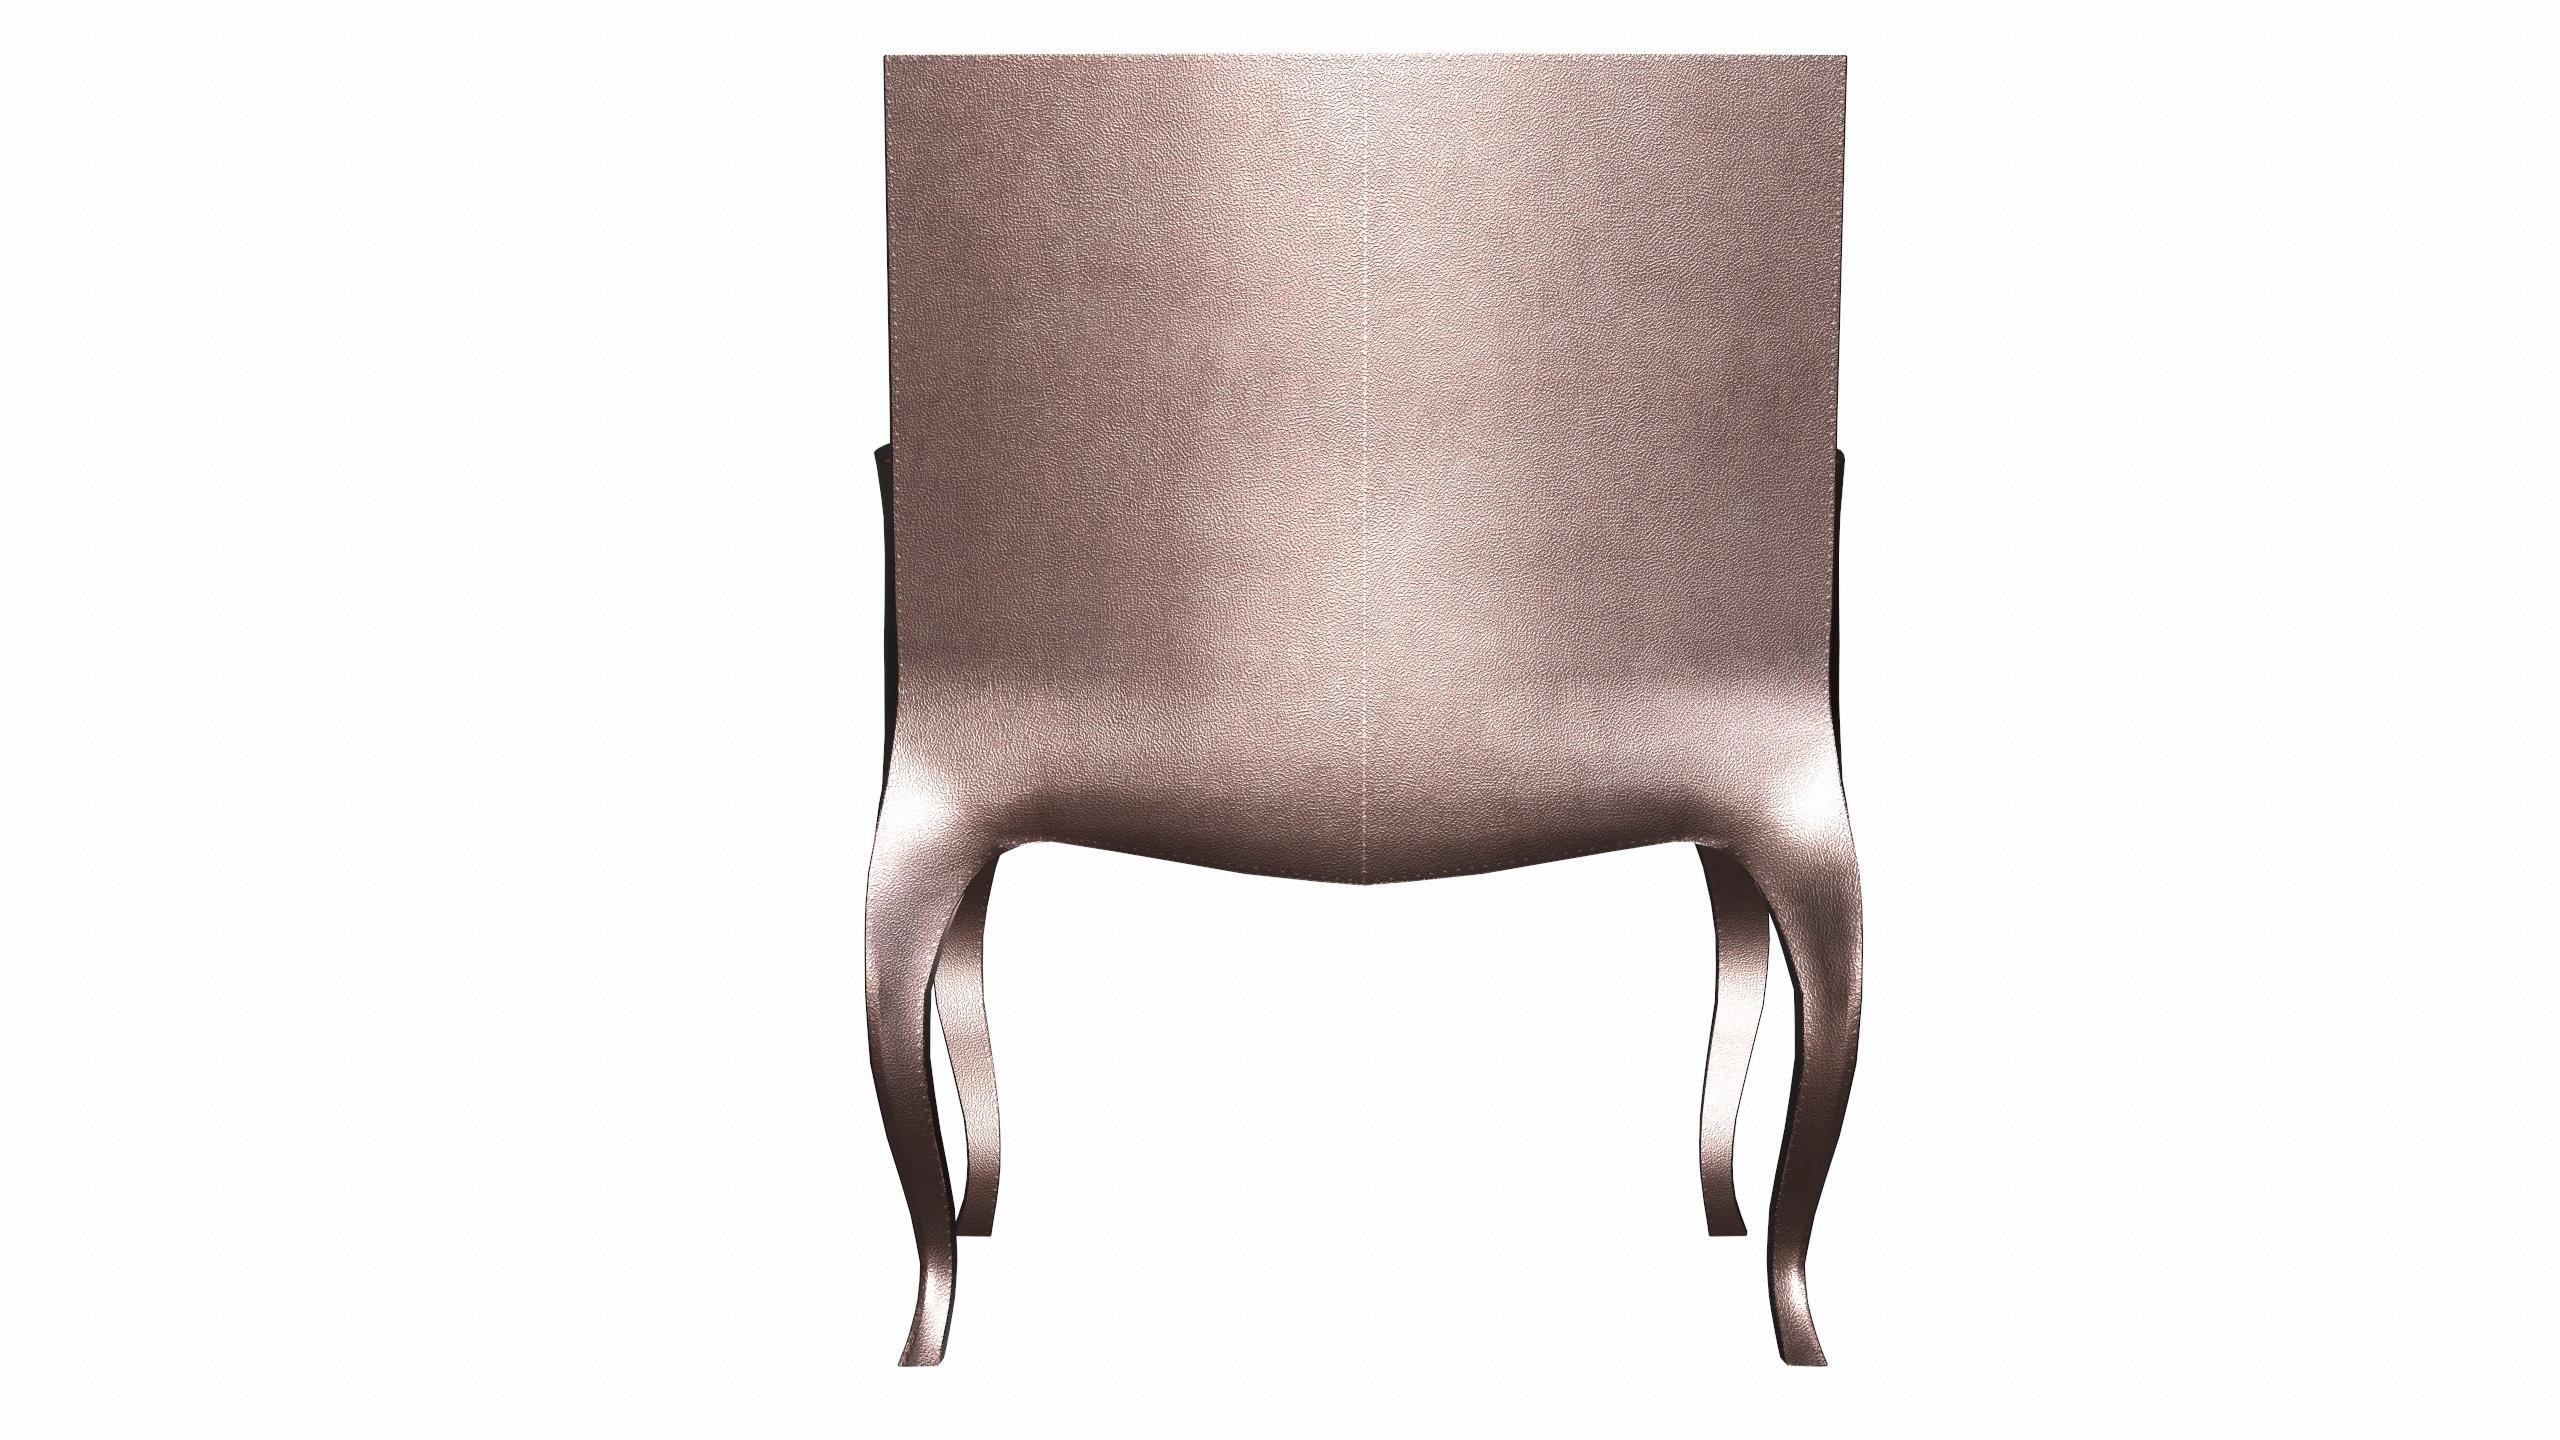 Metal Deco Chairs Fine Hammered in Copper by Paul Mathieu For Sale